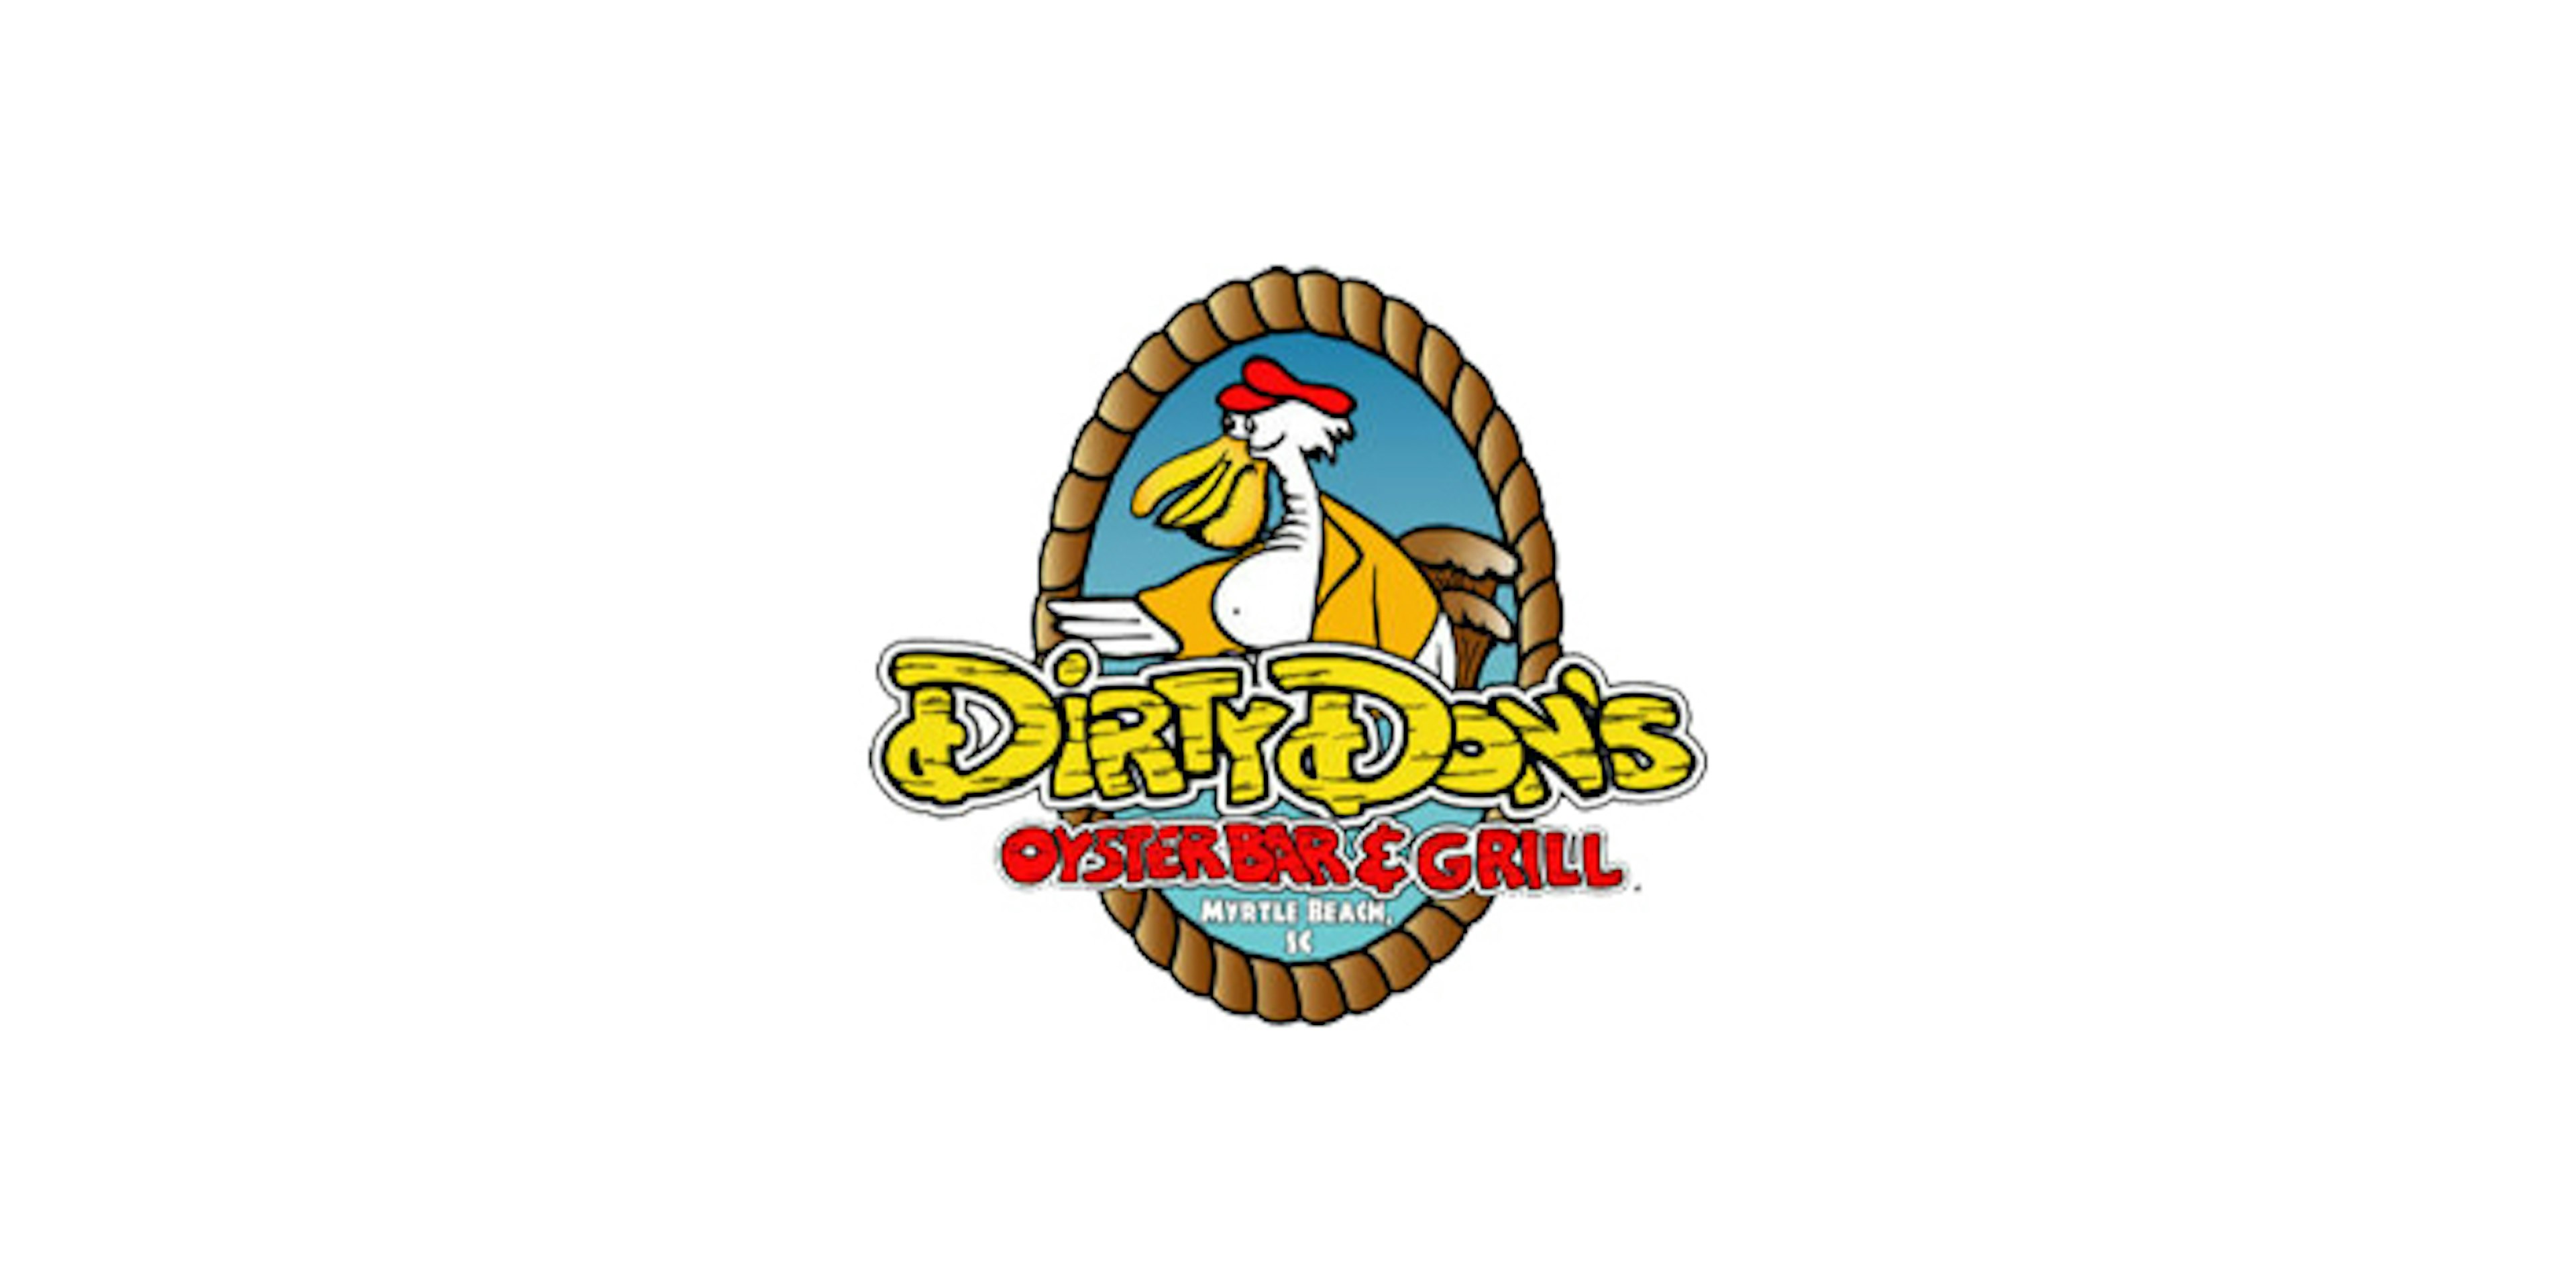 Dirty Don’s Oyster Bar & Grill